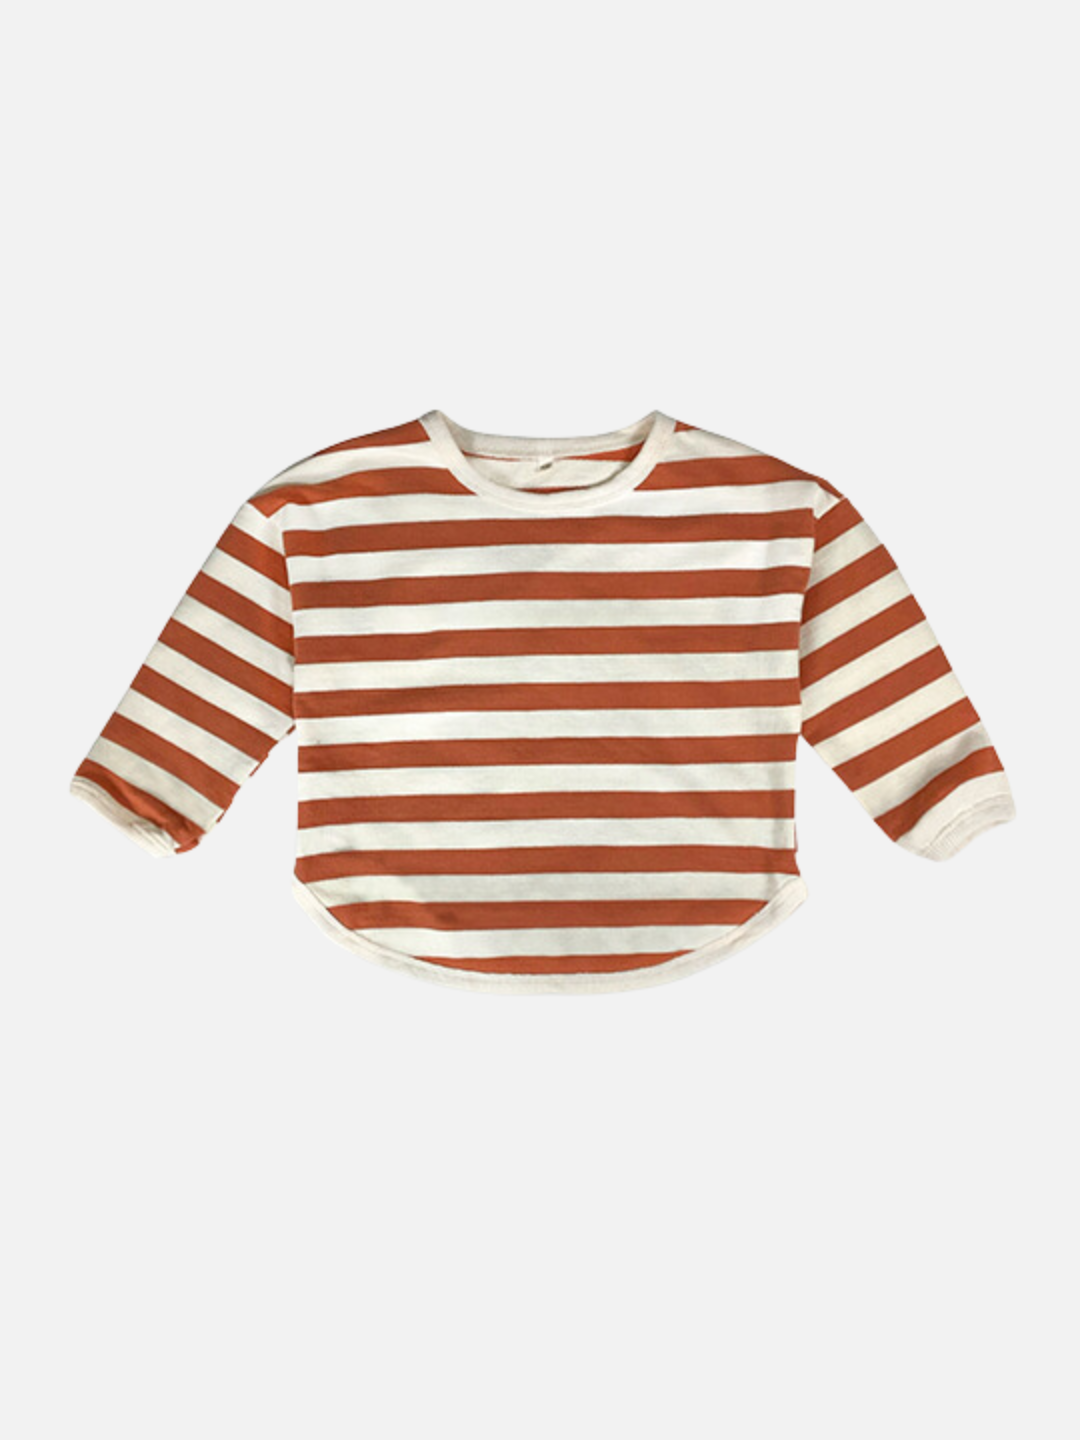 Rust | A kids' tee shirt with a curved hem in peaches and cream